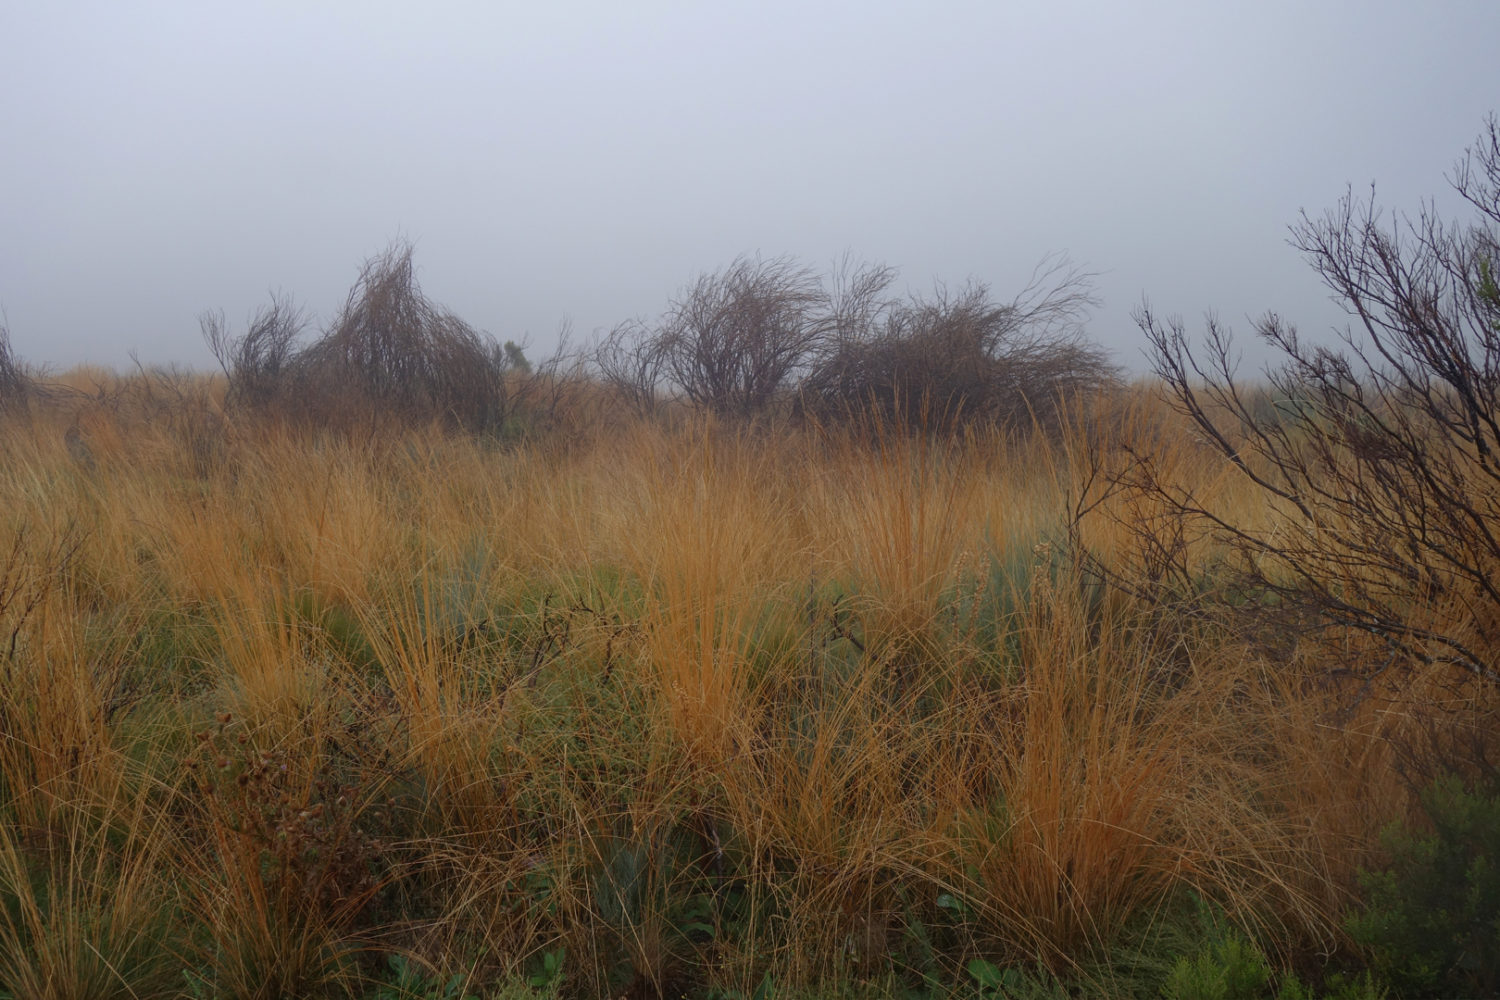 "Grasses, Molinaseca" Giclée print from "Portals & Planes: Pictures by Paul Dodd"